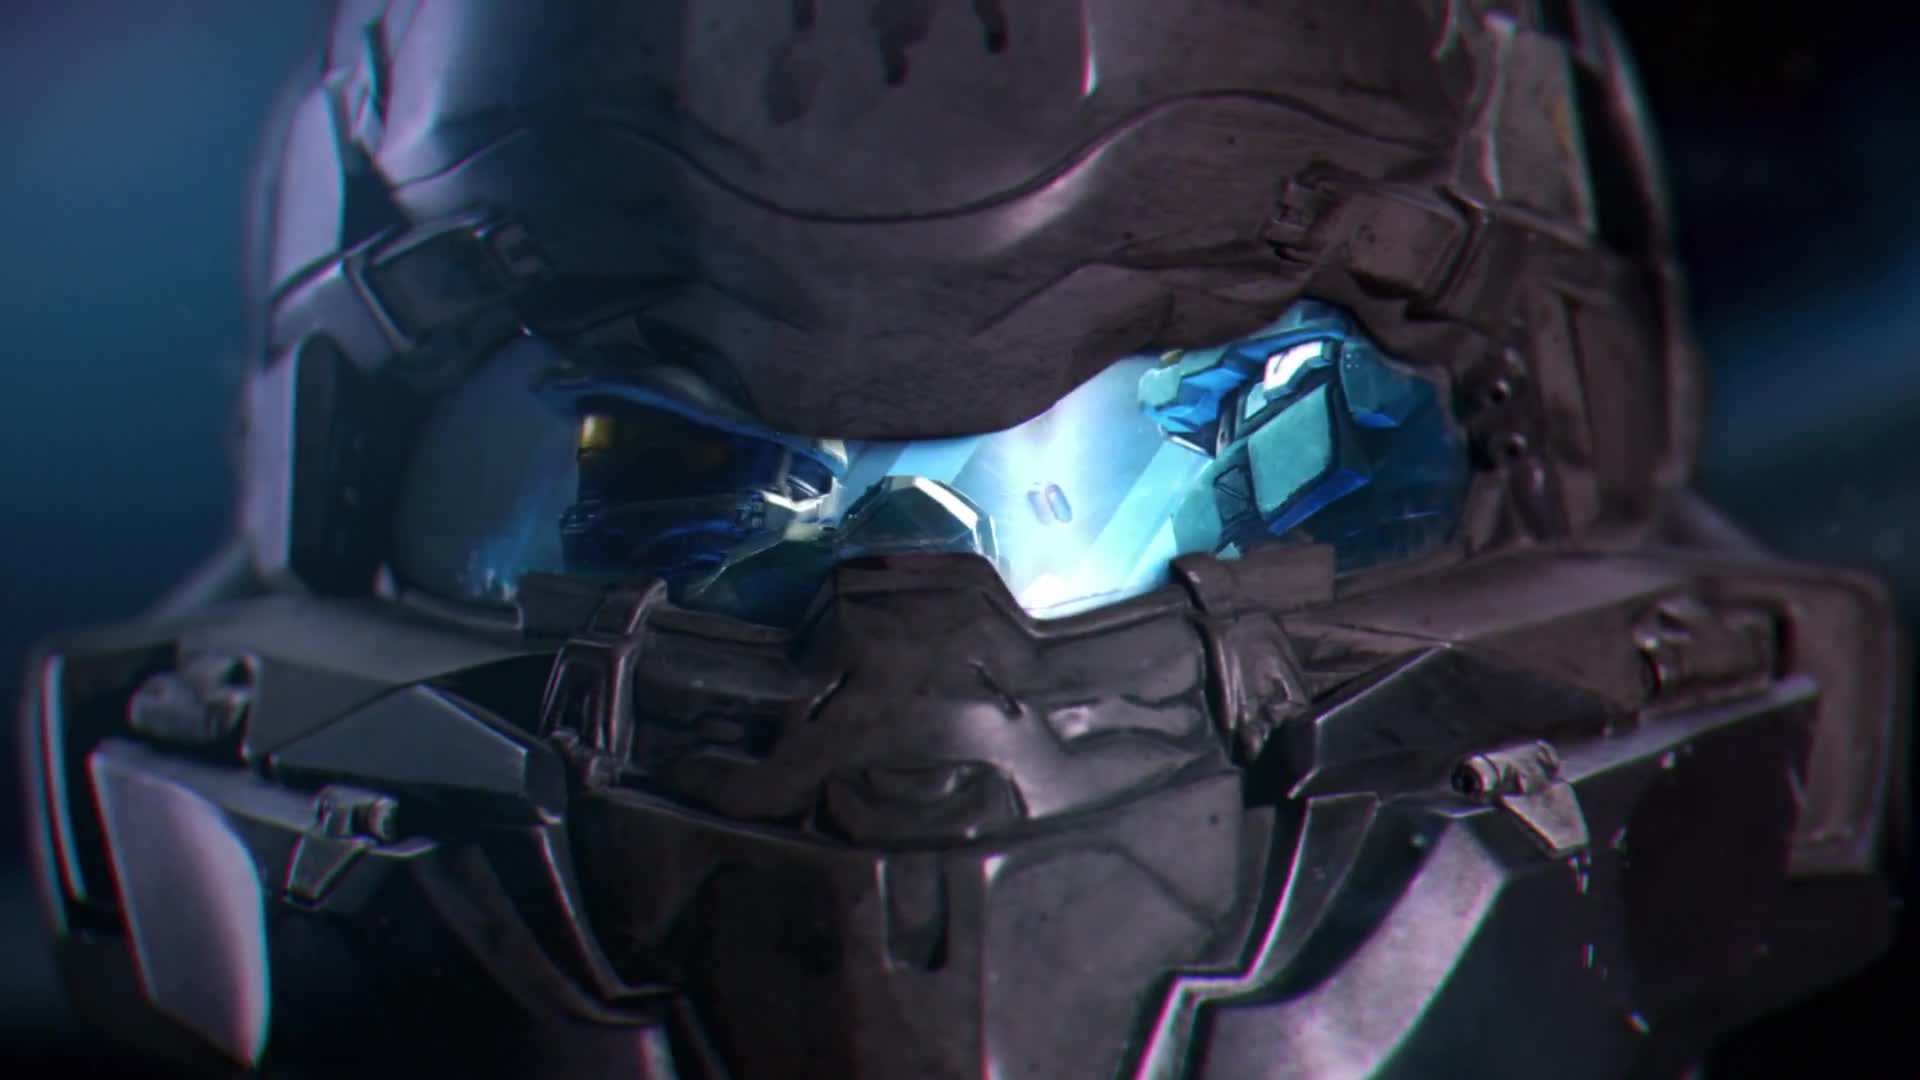 Halo 5 - Experience trailer